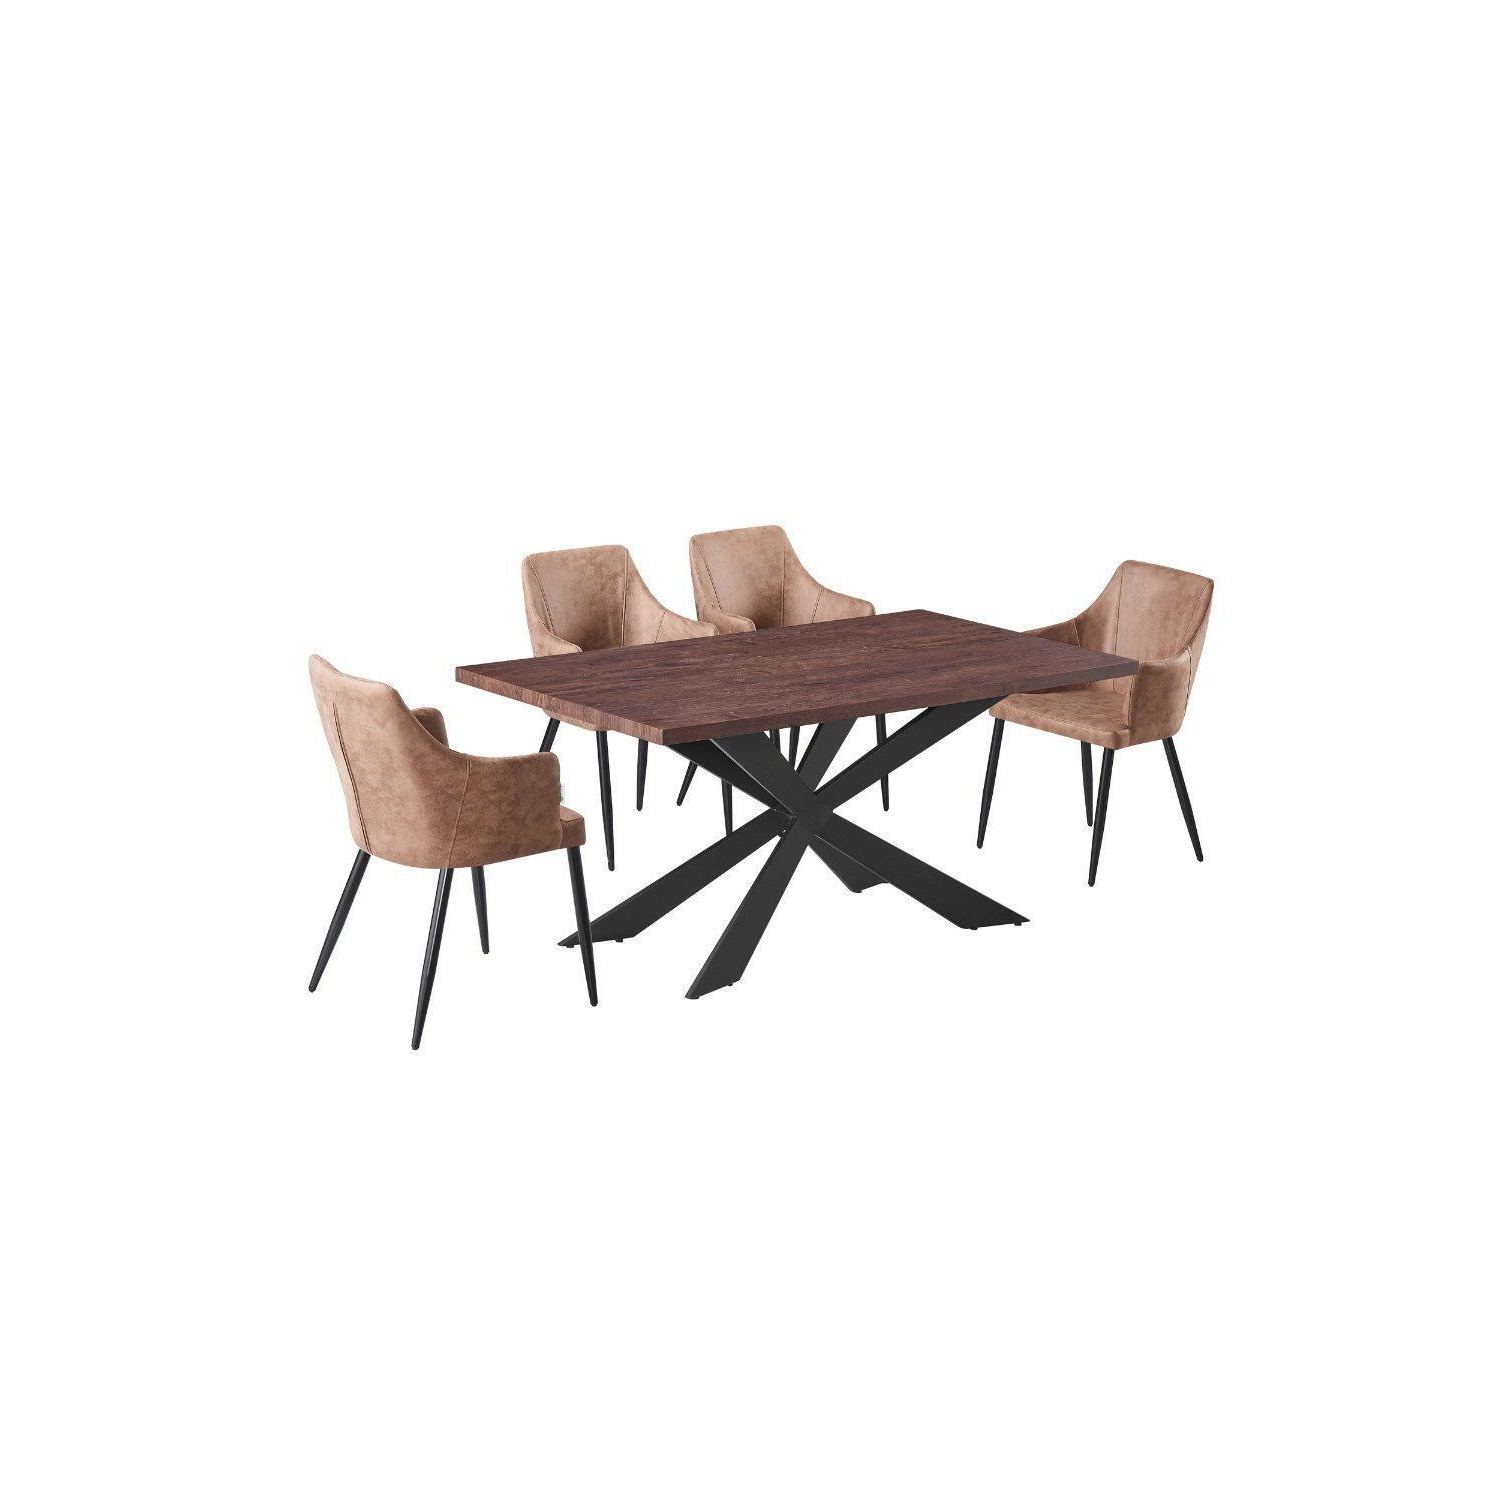 'Zarah Duke' Dining Set with a Table and 4 Chairs - image 1